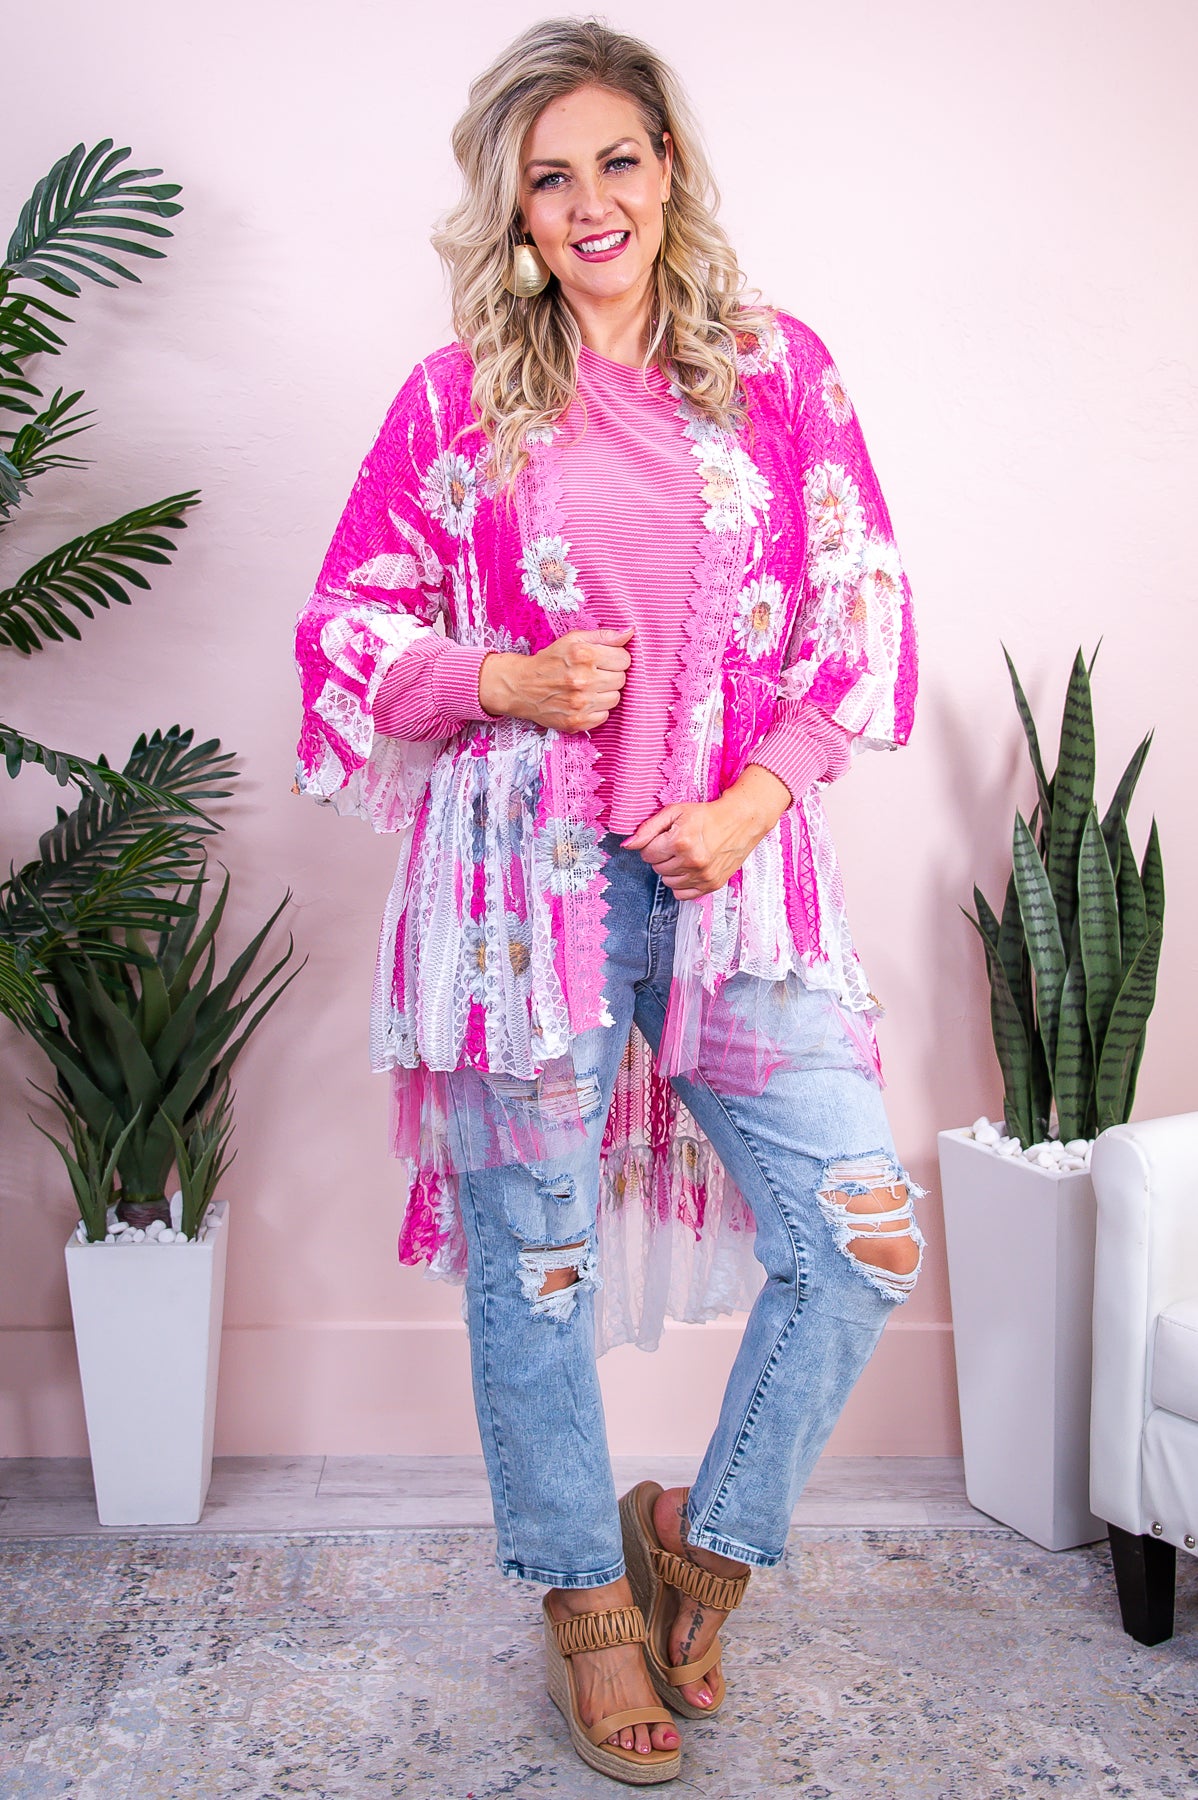 I Belong With The Flowers Hot Pink/Ivory Floral Lace Kimono - O5370HPK